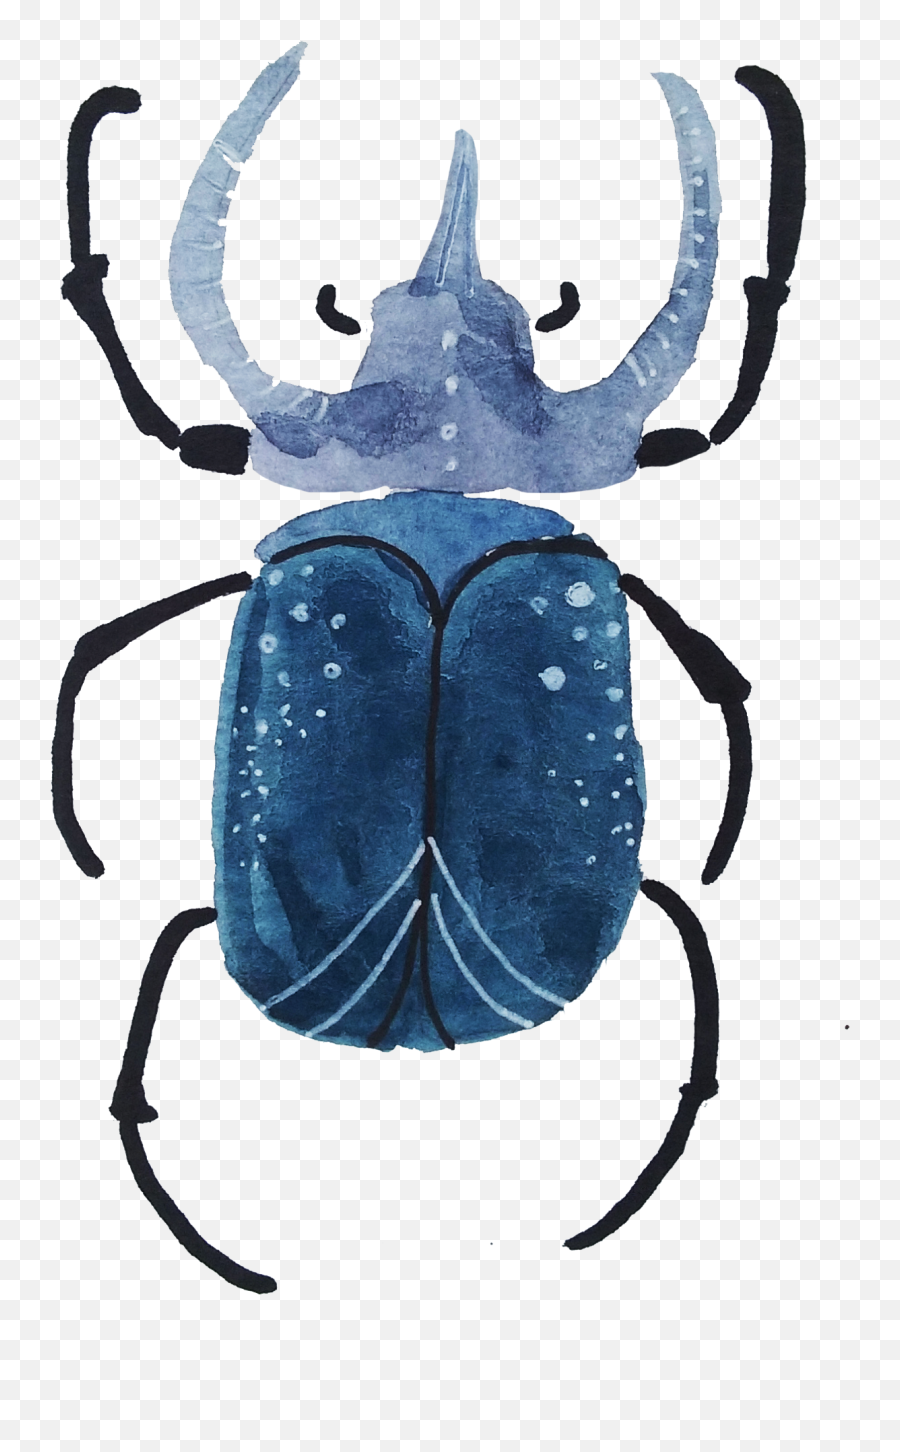 Download With Both Watercolors And Gouache - Dung Beetle Dung Beetle Png,Beetle Png